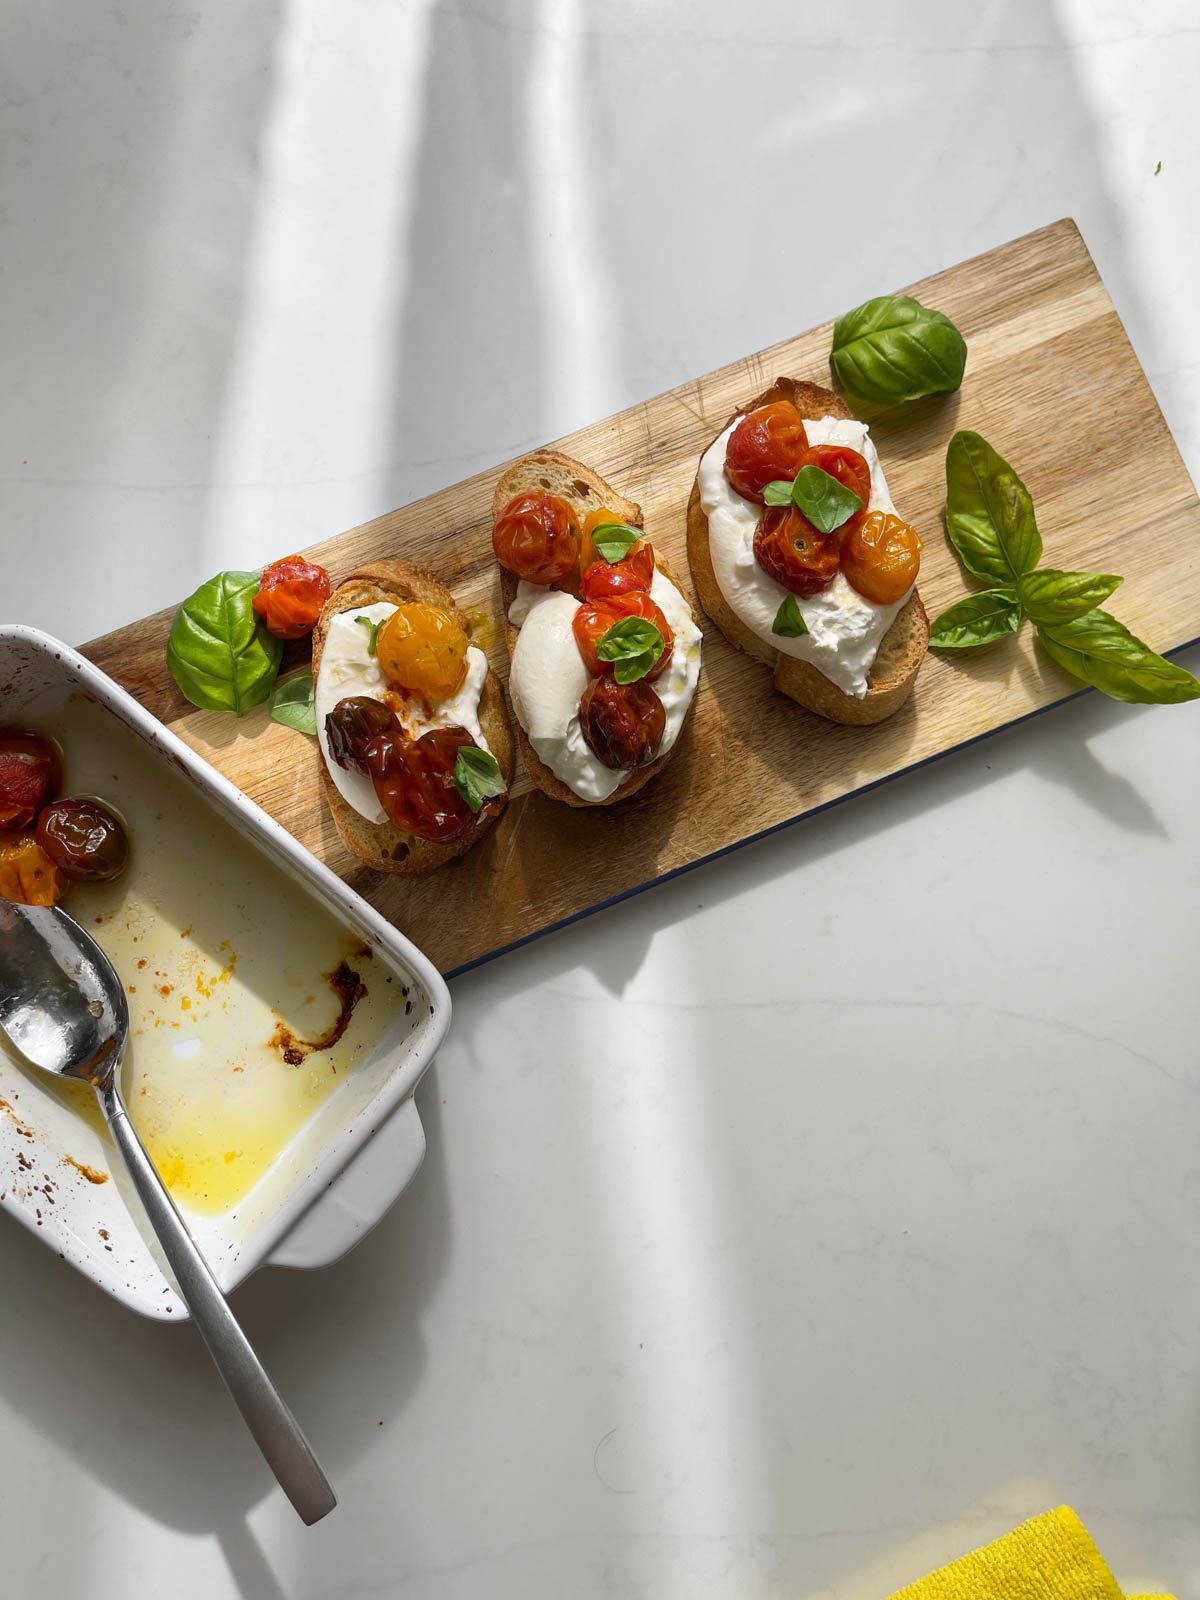 Jammy tomatoes on a baking dish next a wood board with bread topped with cheese, tomatoes and basil